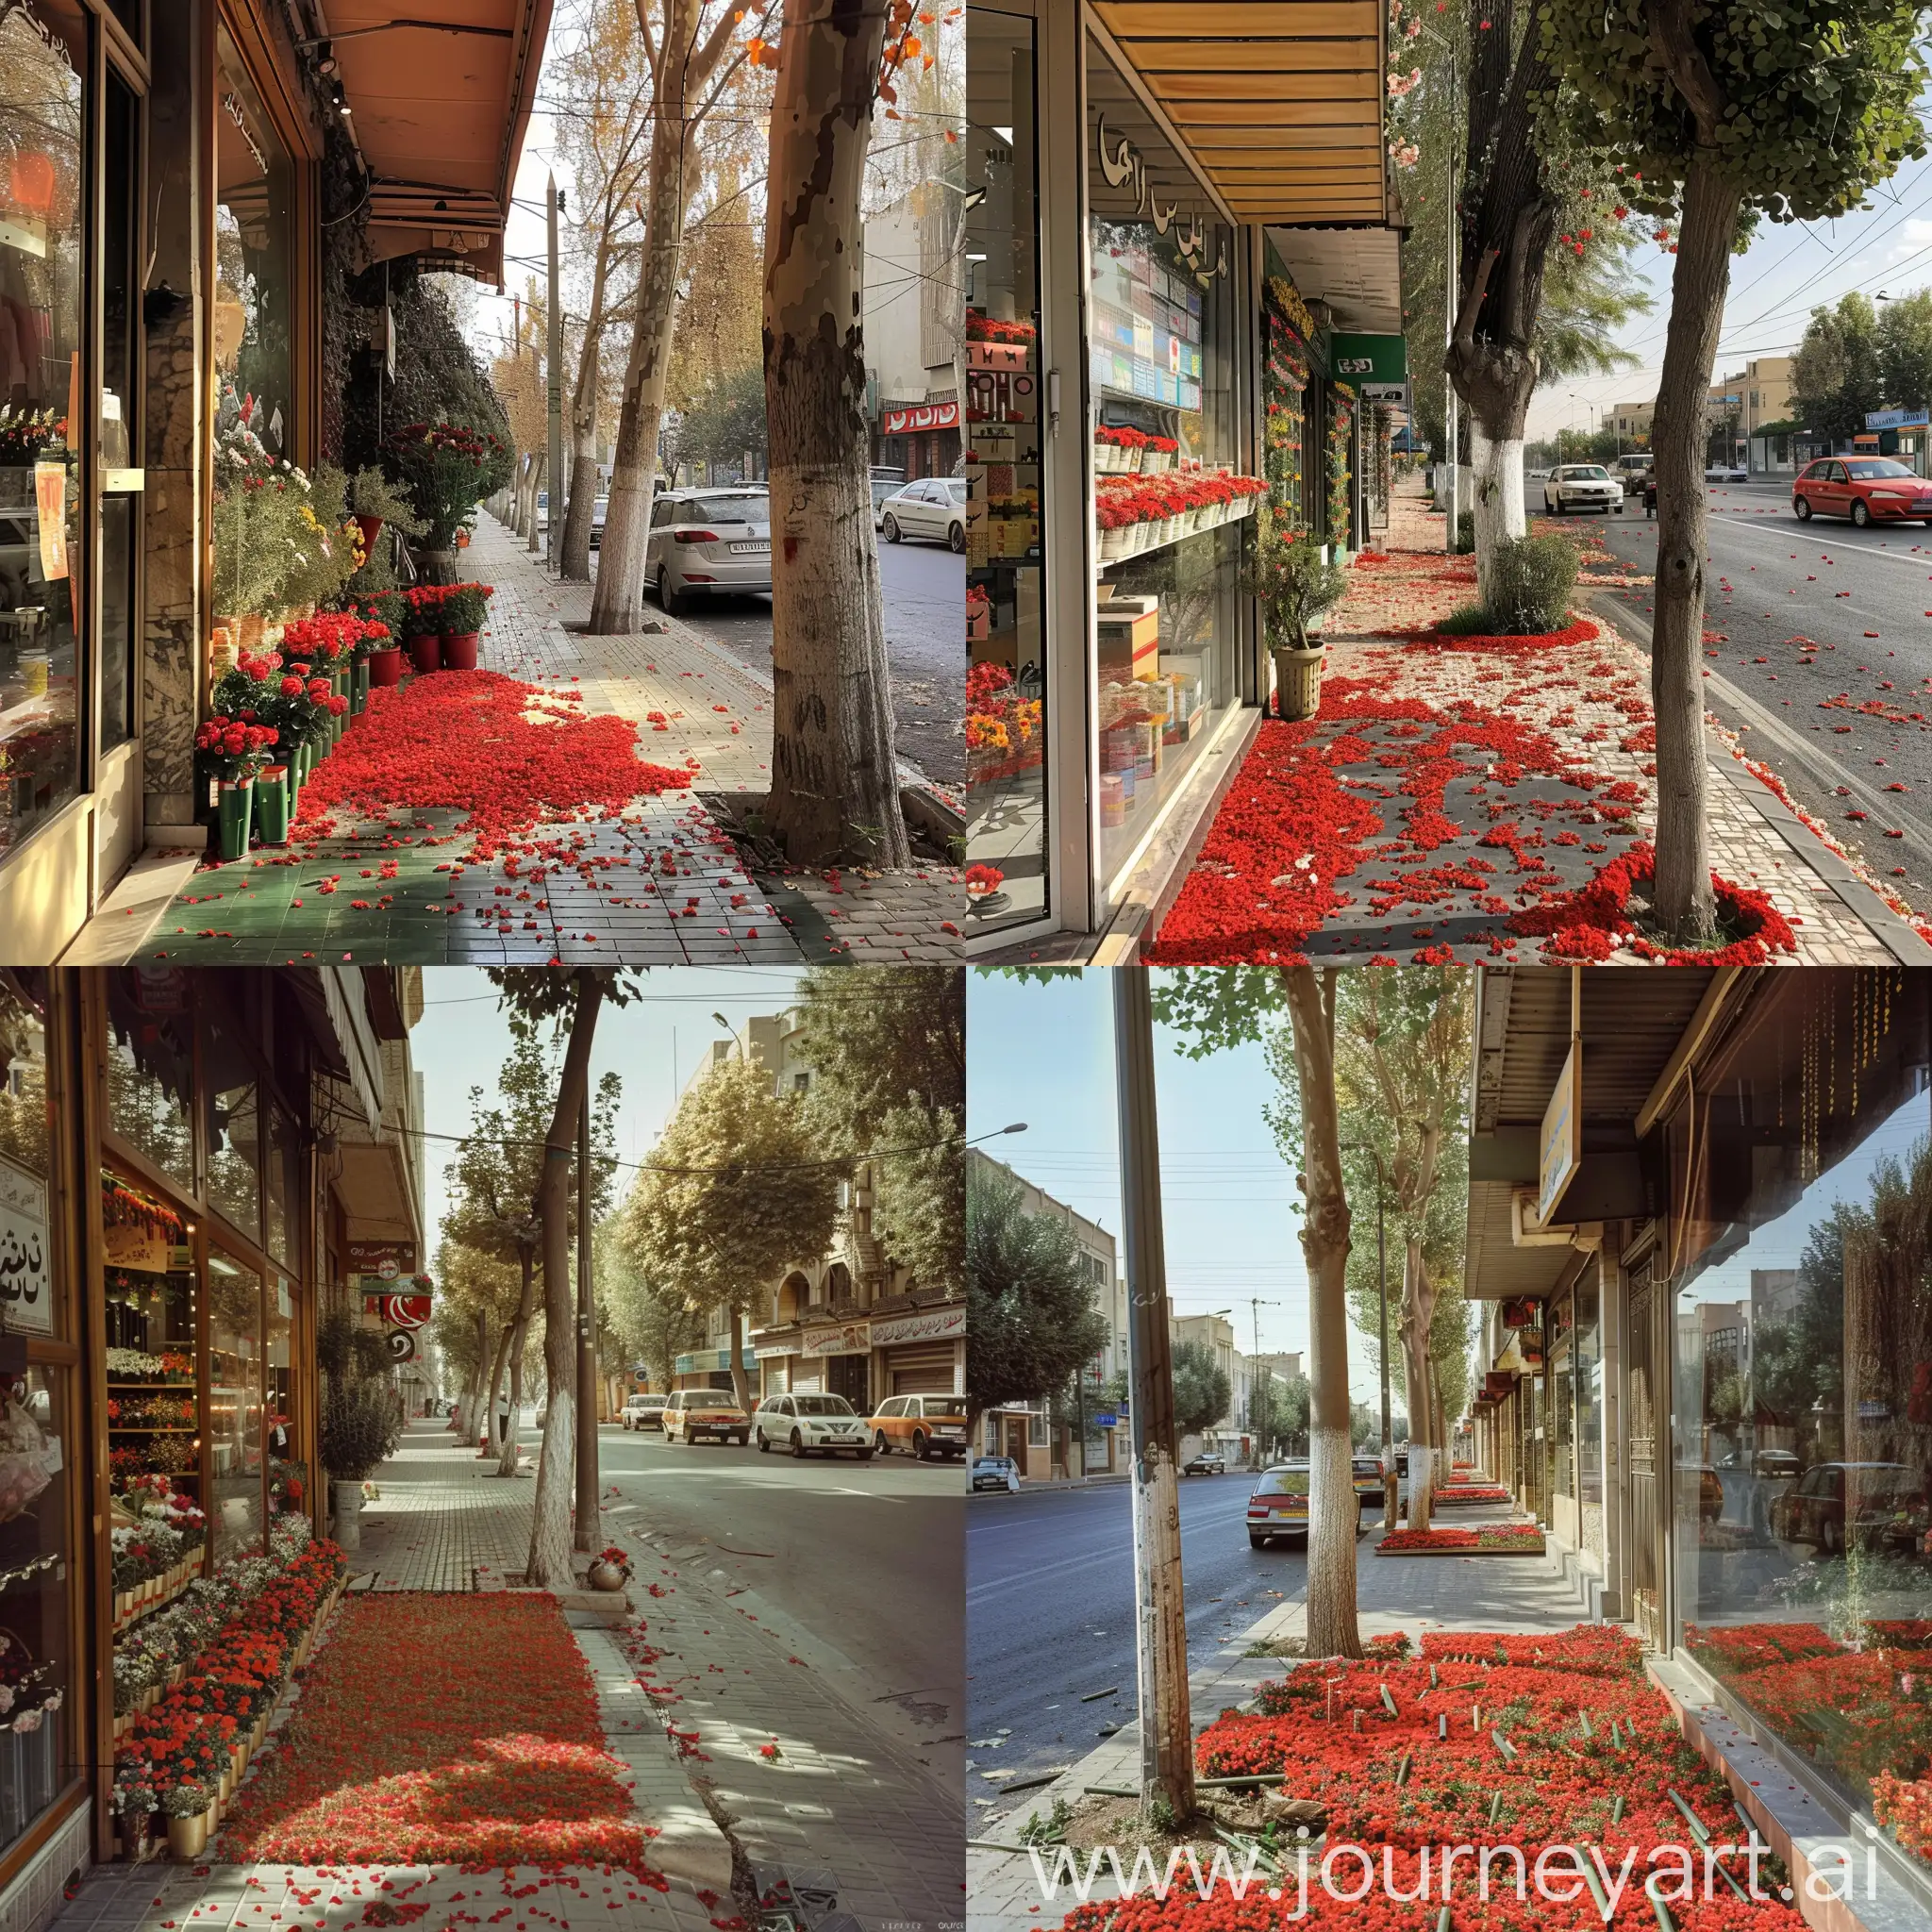 A flower shop on the side of a street in one of today's cities of Iran, where the distance from the shop to the street, which is the sidewalk, is full of red flowers and tiny flower leaves are poured on the ground and the floor is decorated. From this decoration, it is like a carpet of small flowers spread in the distance from the street to the shop. There is a tall tree every five to six meters on the sidewalk. We also have Iranian cars on the street like Samando Peugeot.